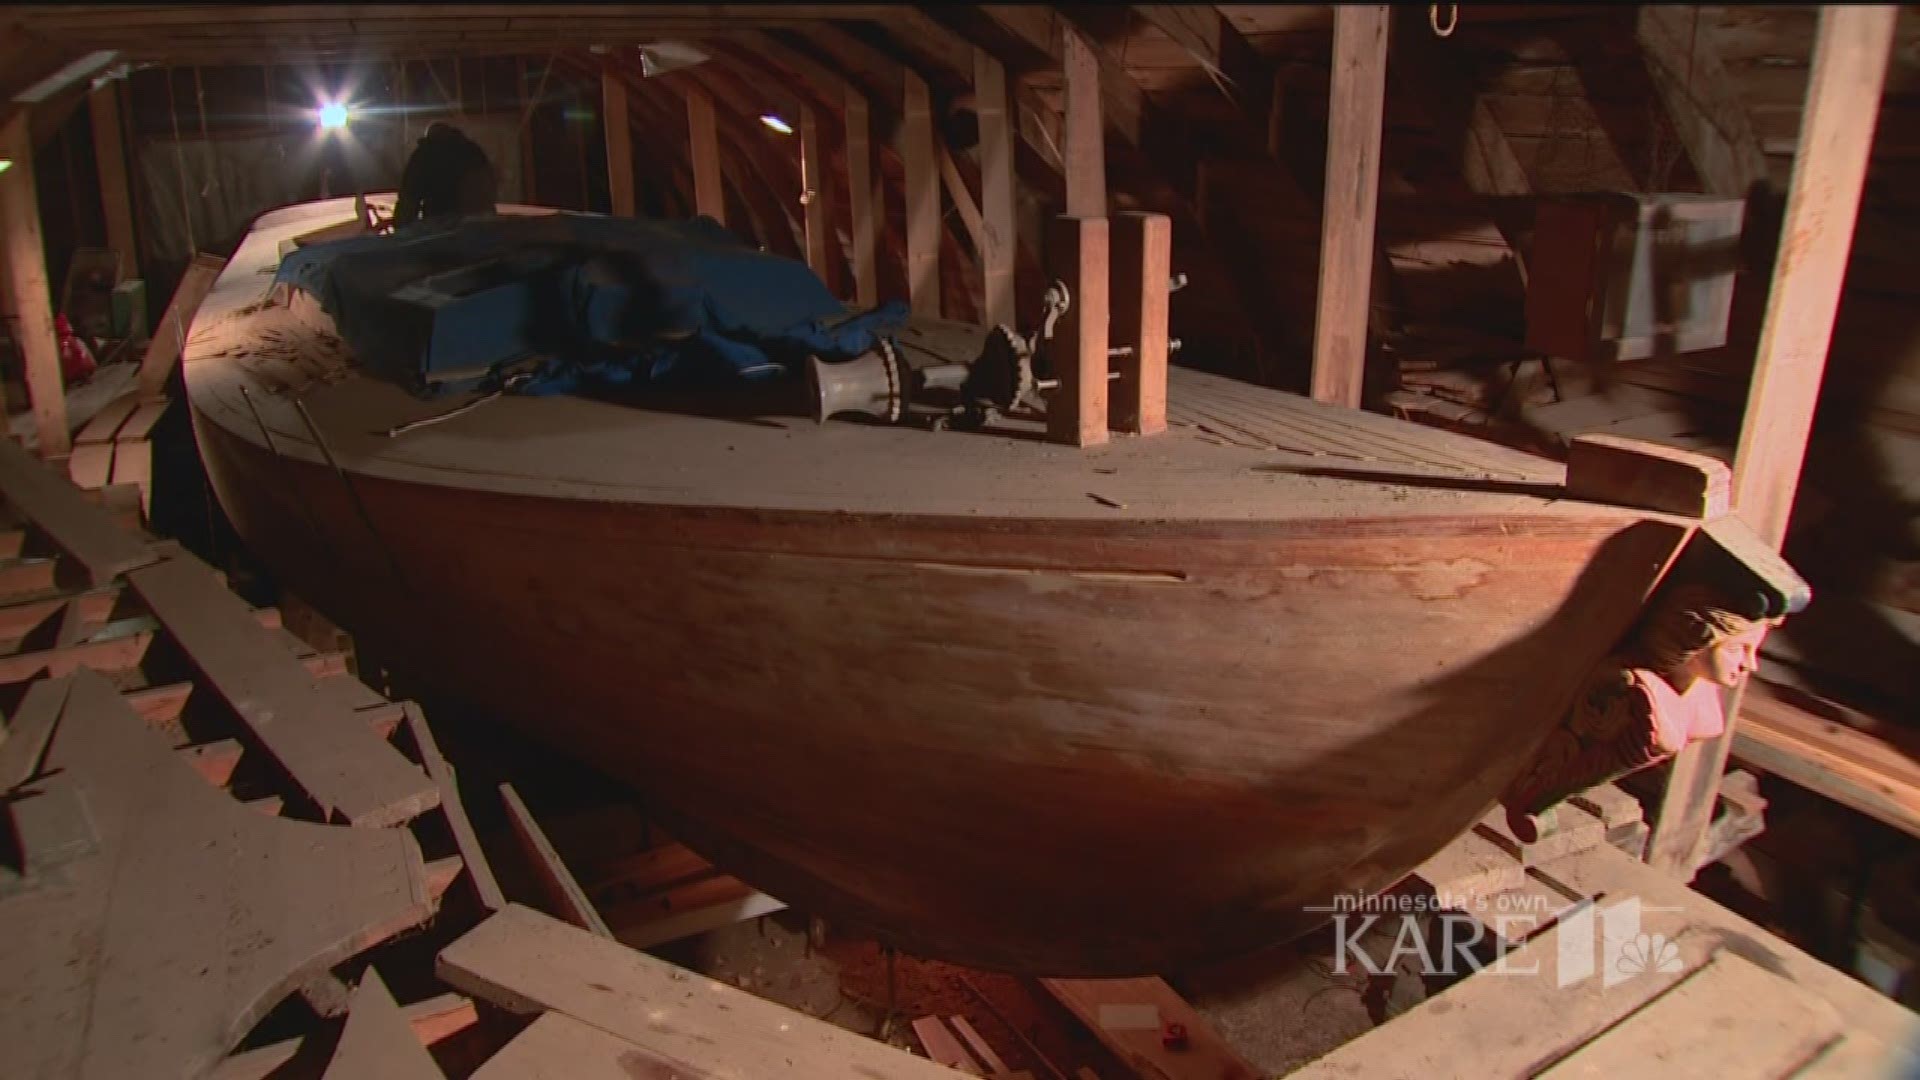 Land of 10,000 Stories: Modern day 'Noah' spends decades building boat